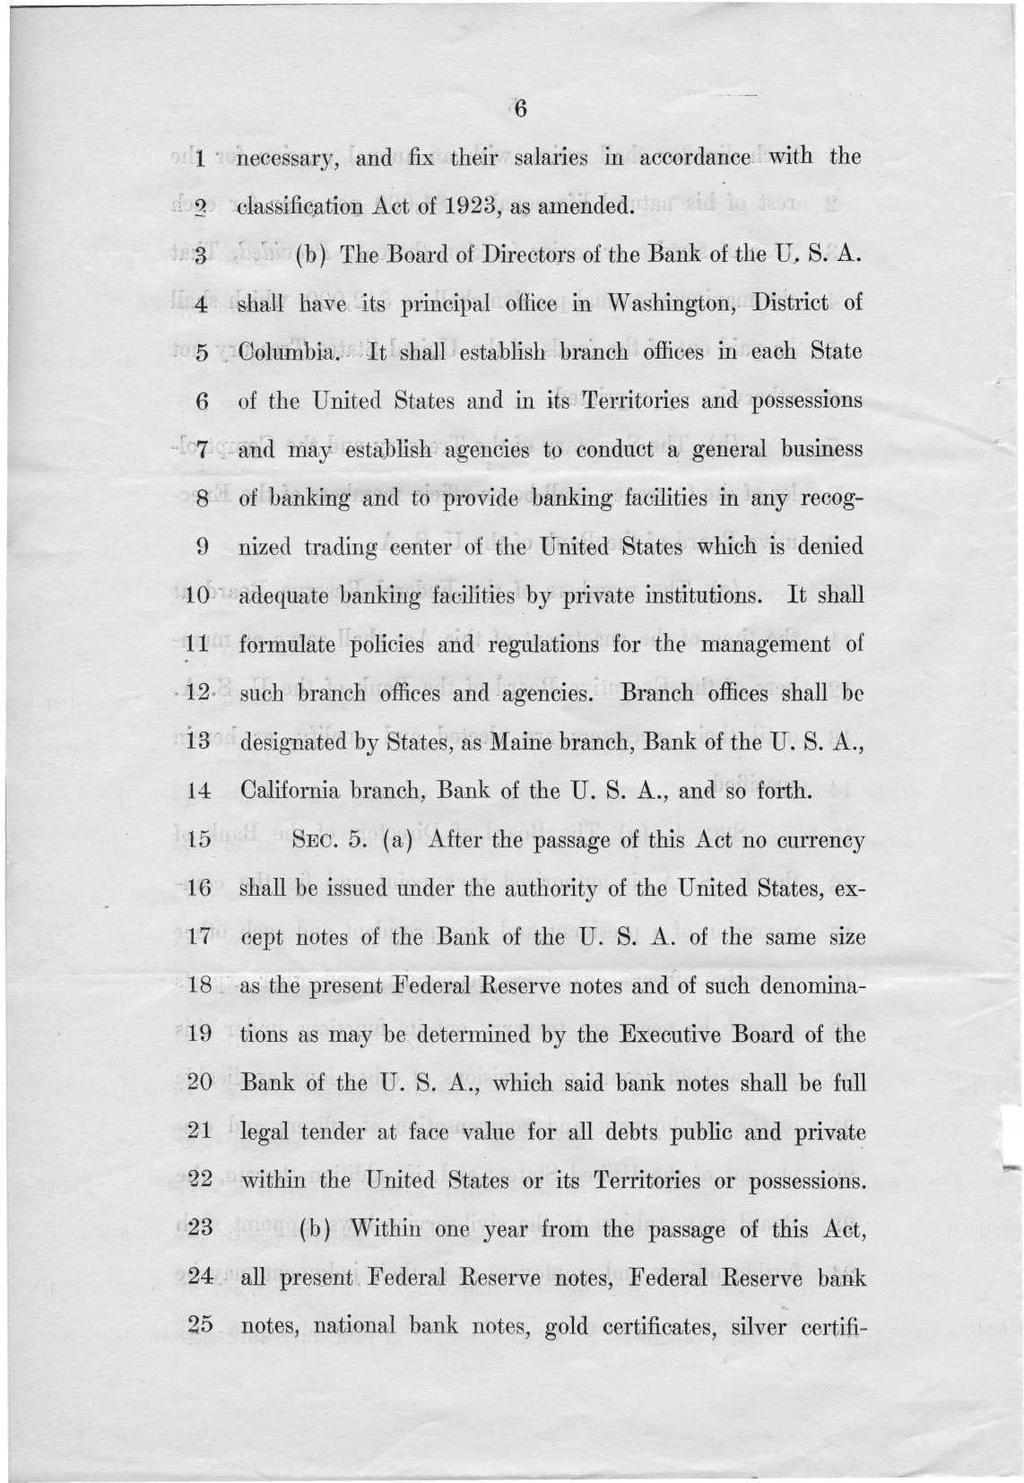 6 1 necessary, and fix their salaries in accordance with the 9 classification Act of 1923, as amended. 3 (b) The Board of Directors of the Bank of the U.S. A. 4 shall have its principal office in Washington; District of 5 Columbia.